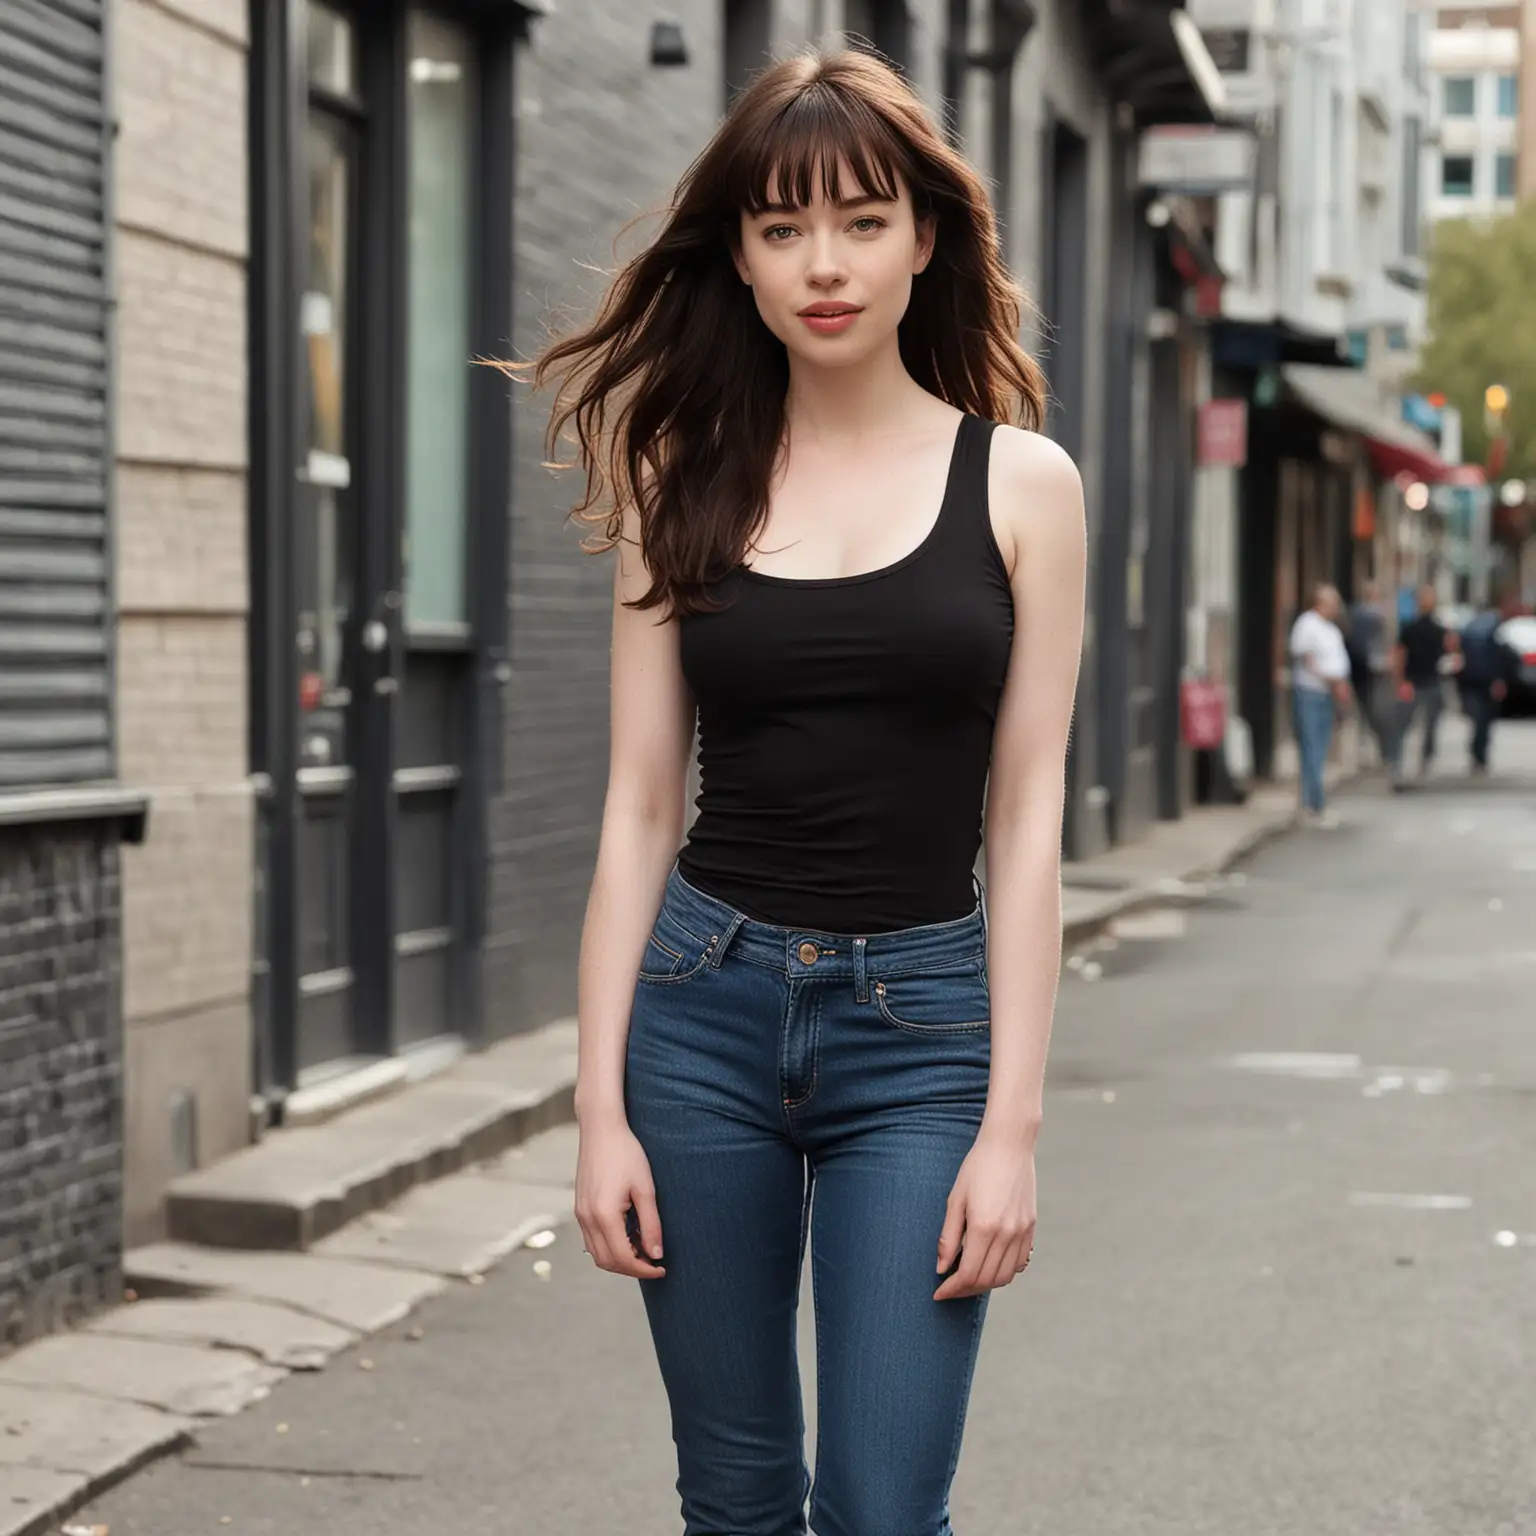 Anna Popplewell in a Spring Street Setting with Modern Casual Fashion